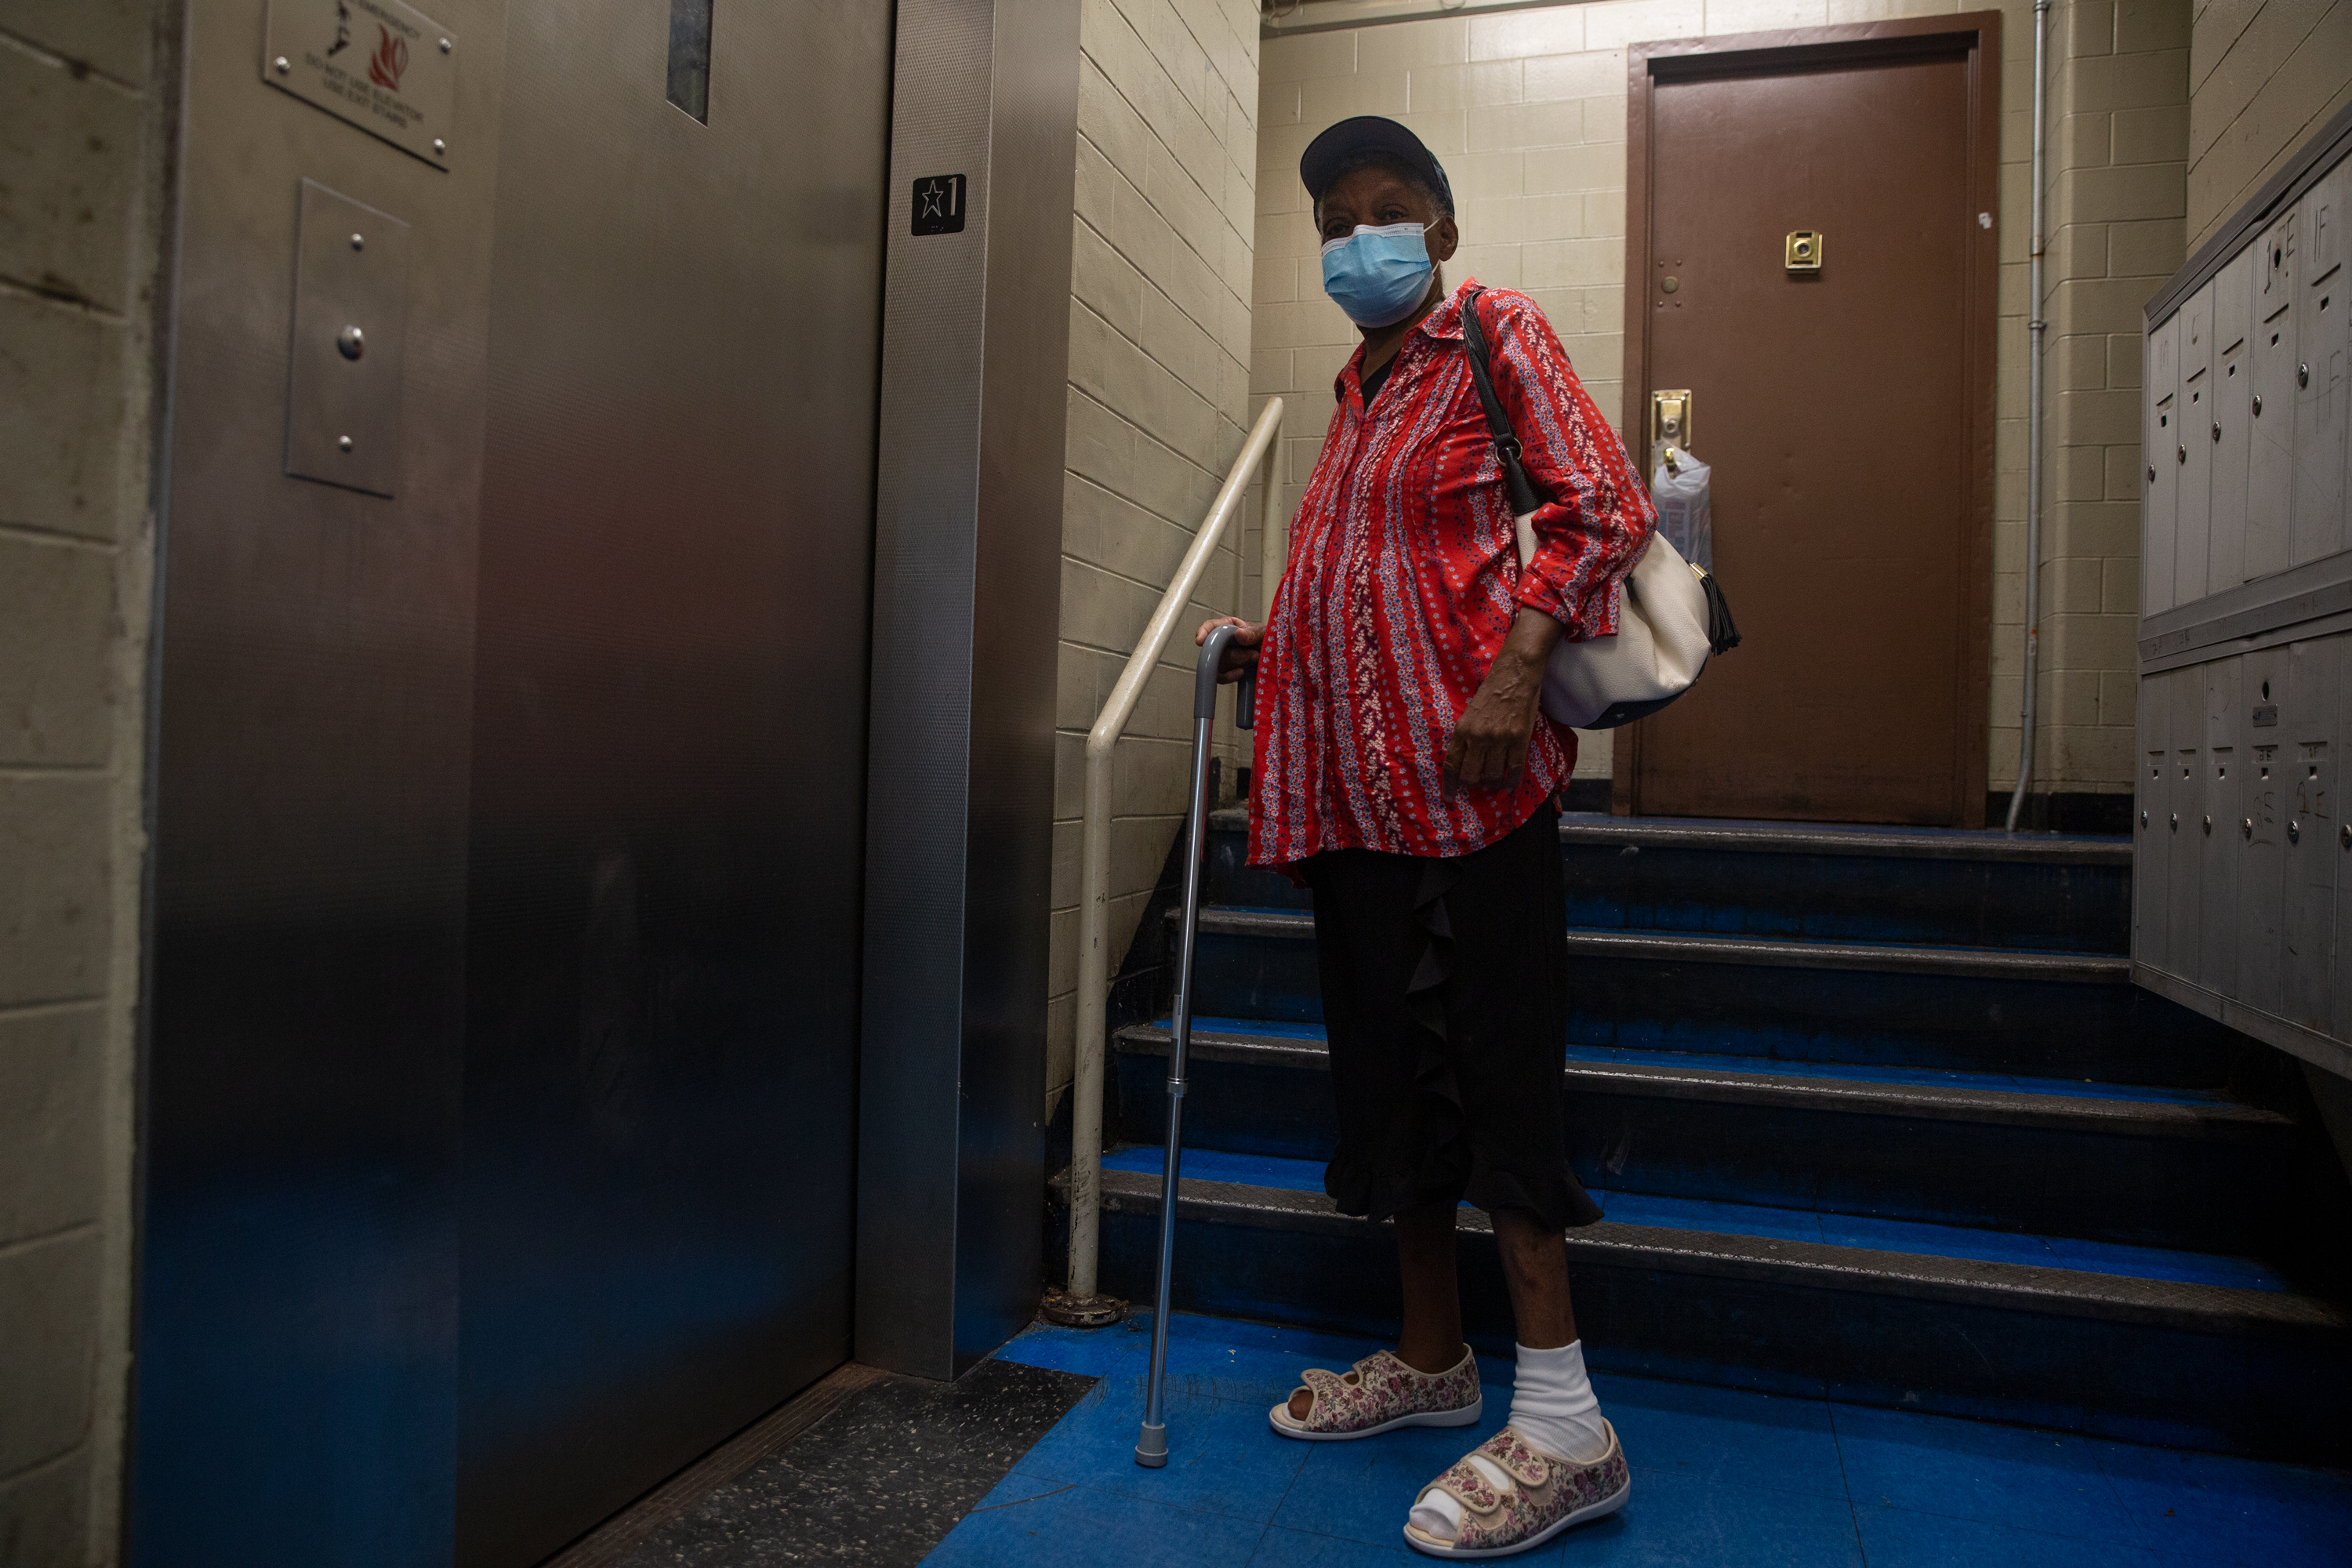 A pair of broken elevators stranded Jacquelyne Pierre in the lobby of her NYCHA building in Fort Greene, Brooklyn after she tried to return home from kidney dialysis.